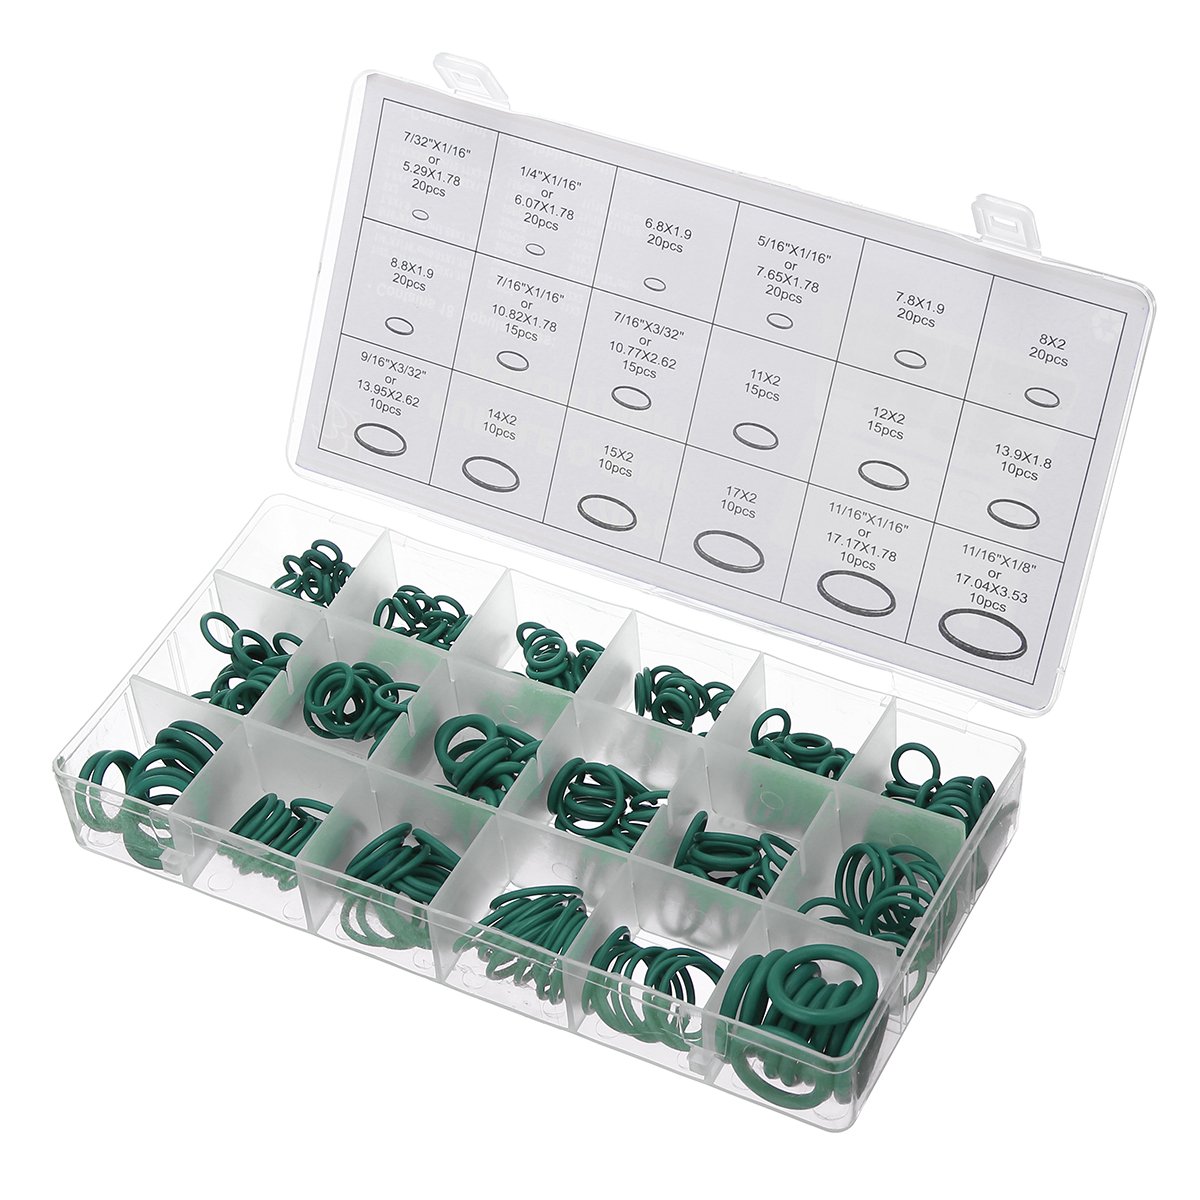 270pcs 18 Sizes O Ring Hydraulic Nitrile Seals Green Rubber O Ring Assortment Kit 2